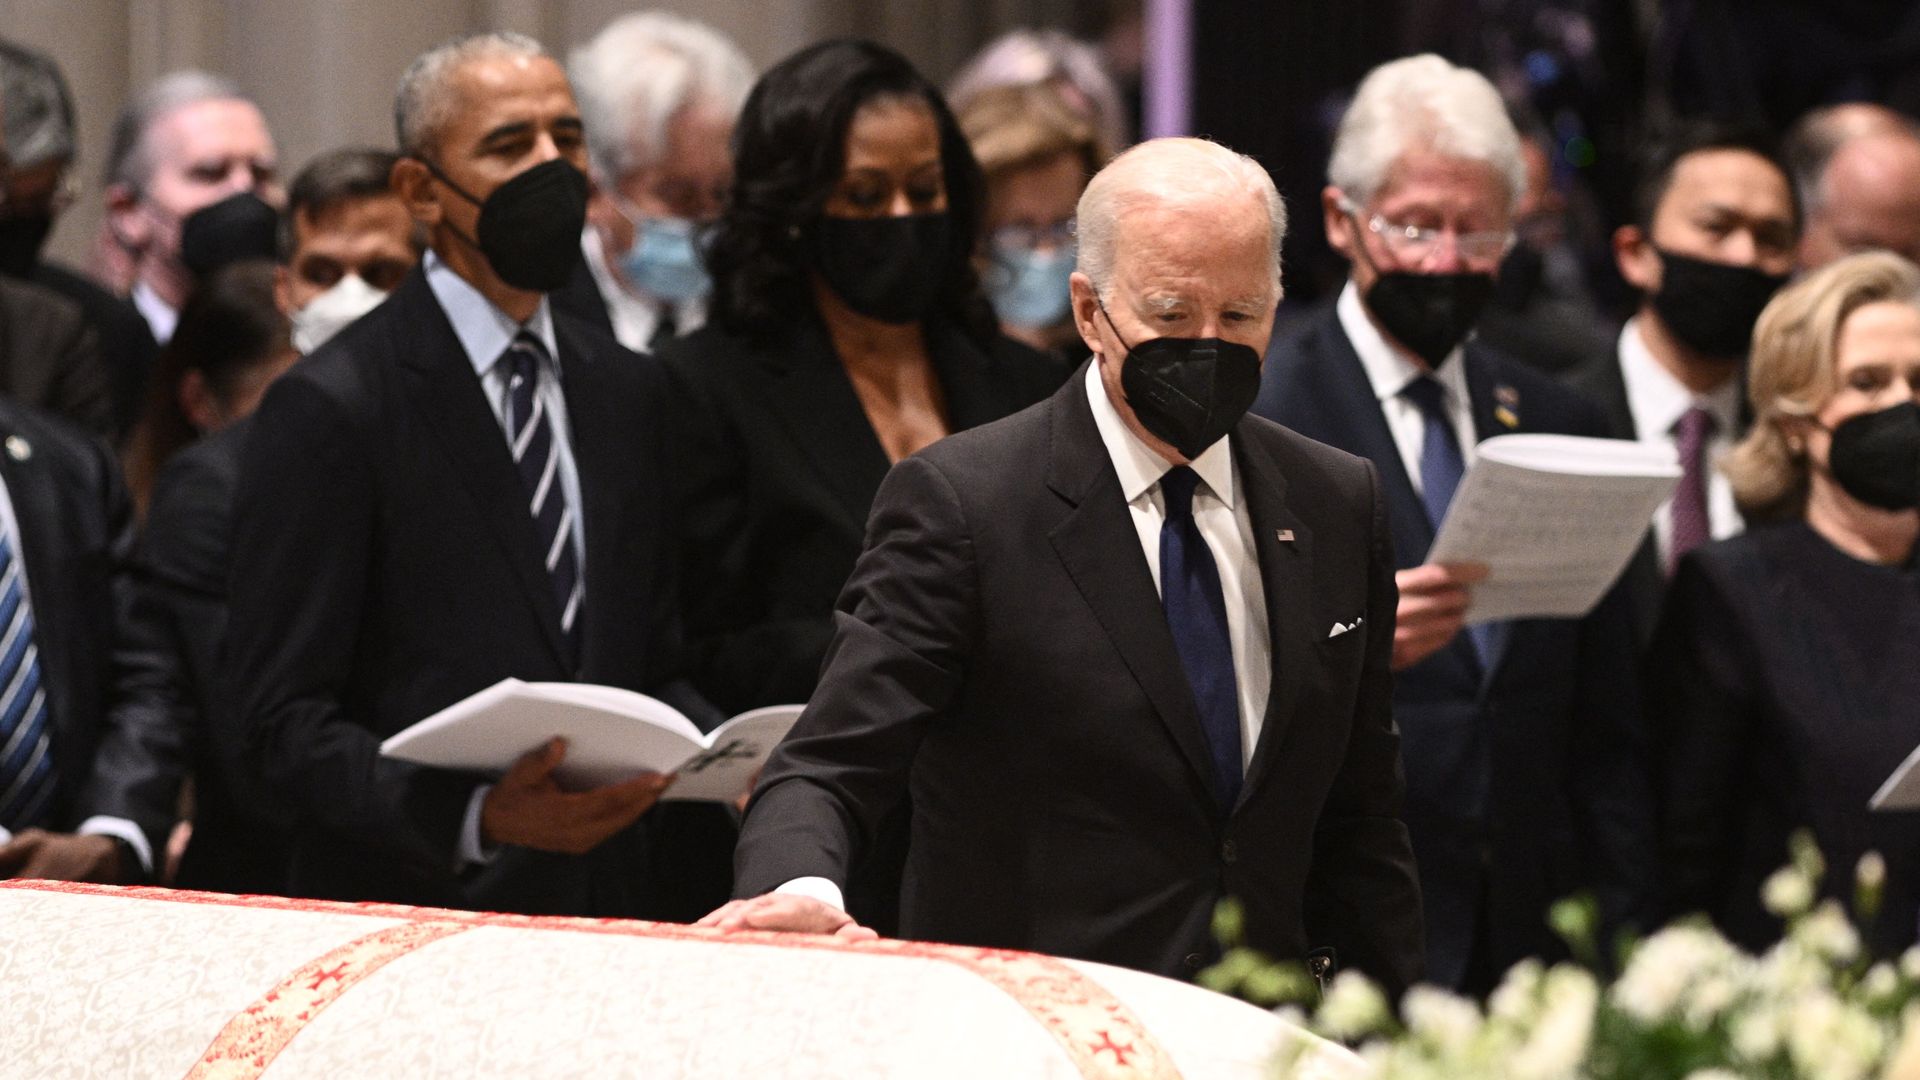 President Biden, flanked by former Presidents Obama and Clinton, touches the casket of the late Secretary of State Madeleine Albright.